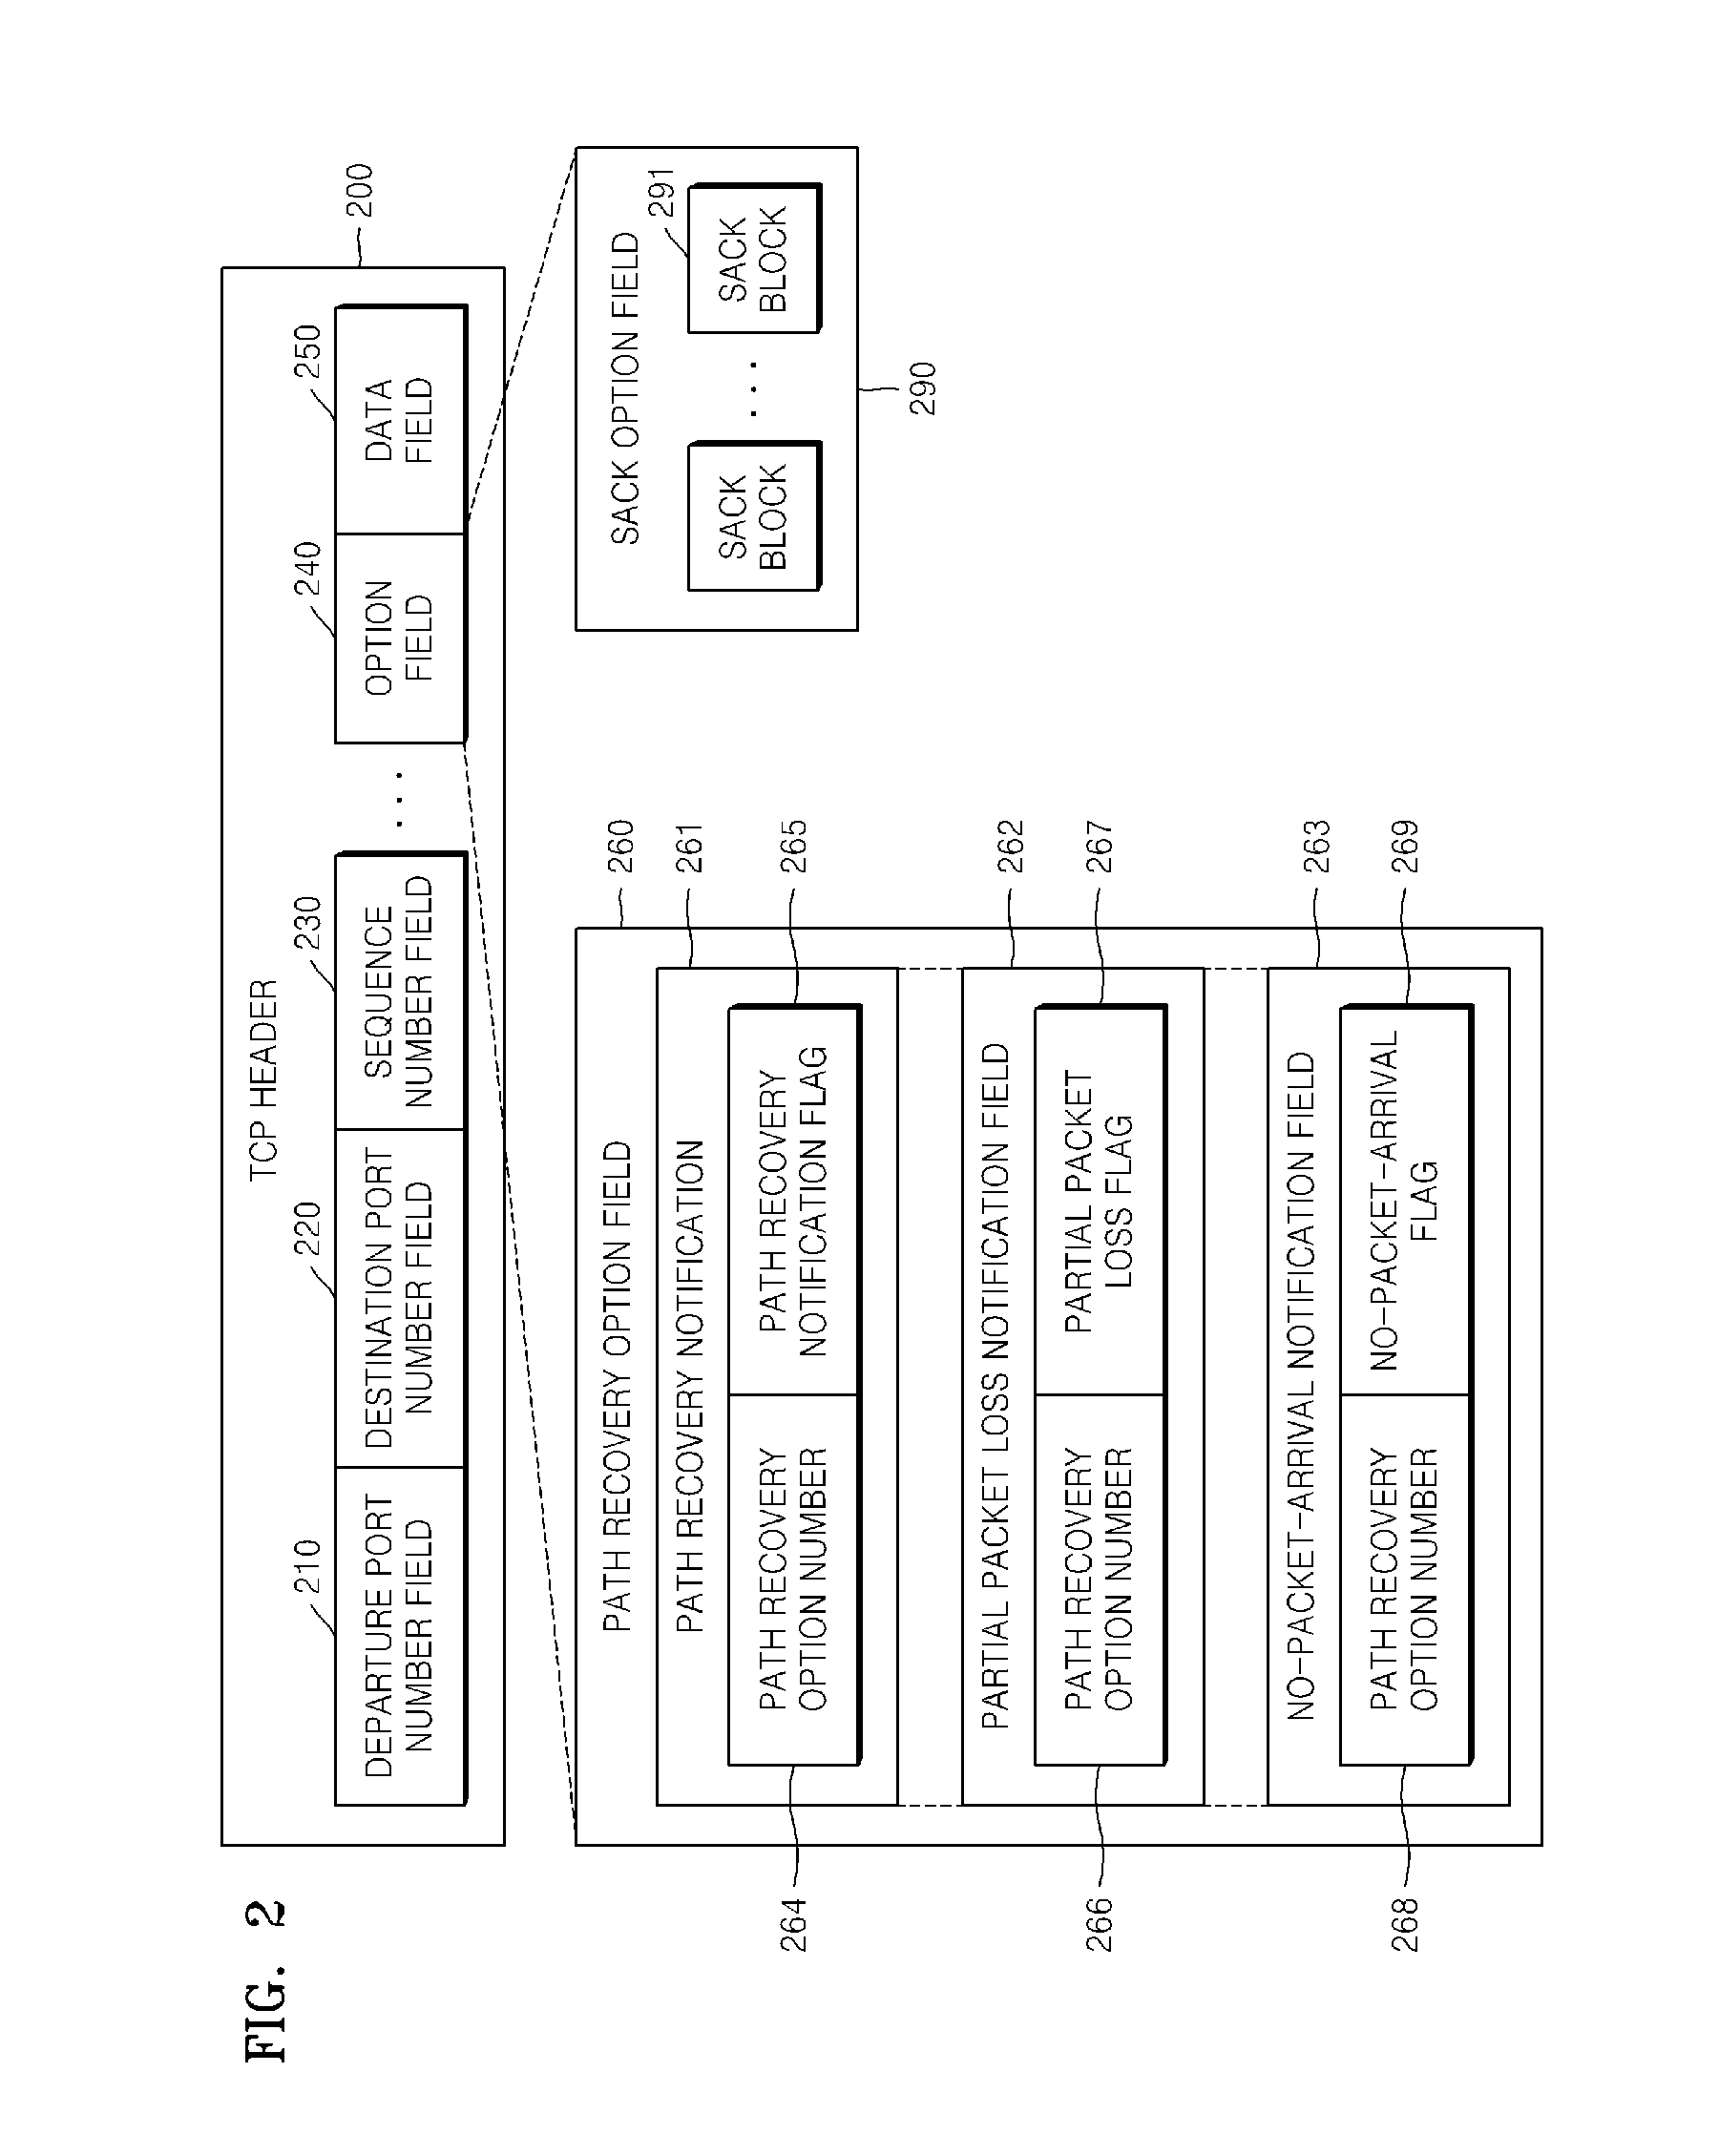 Apparatus and method for improving transport control protocol performance using path recovery notification over wireless network